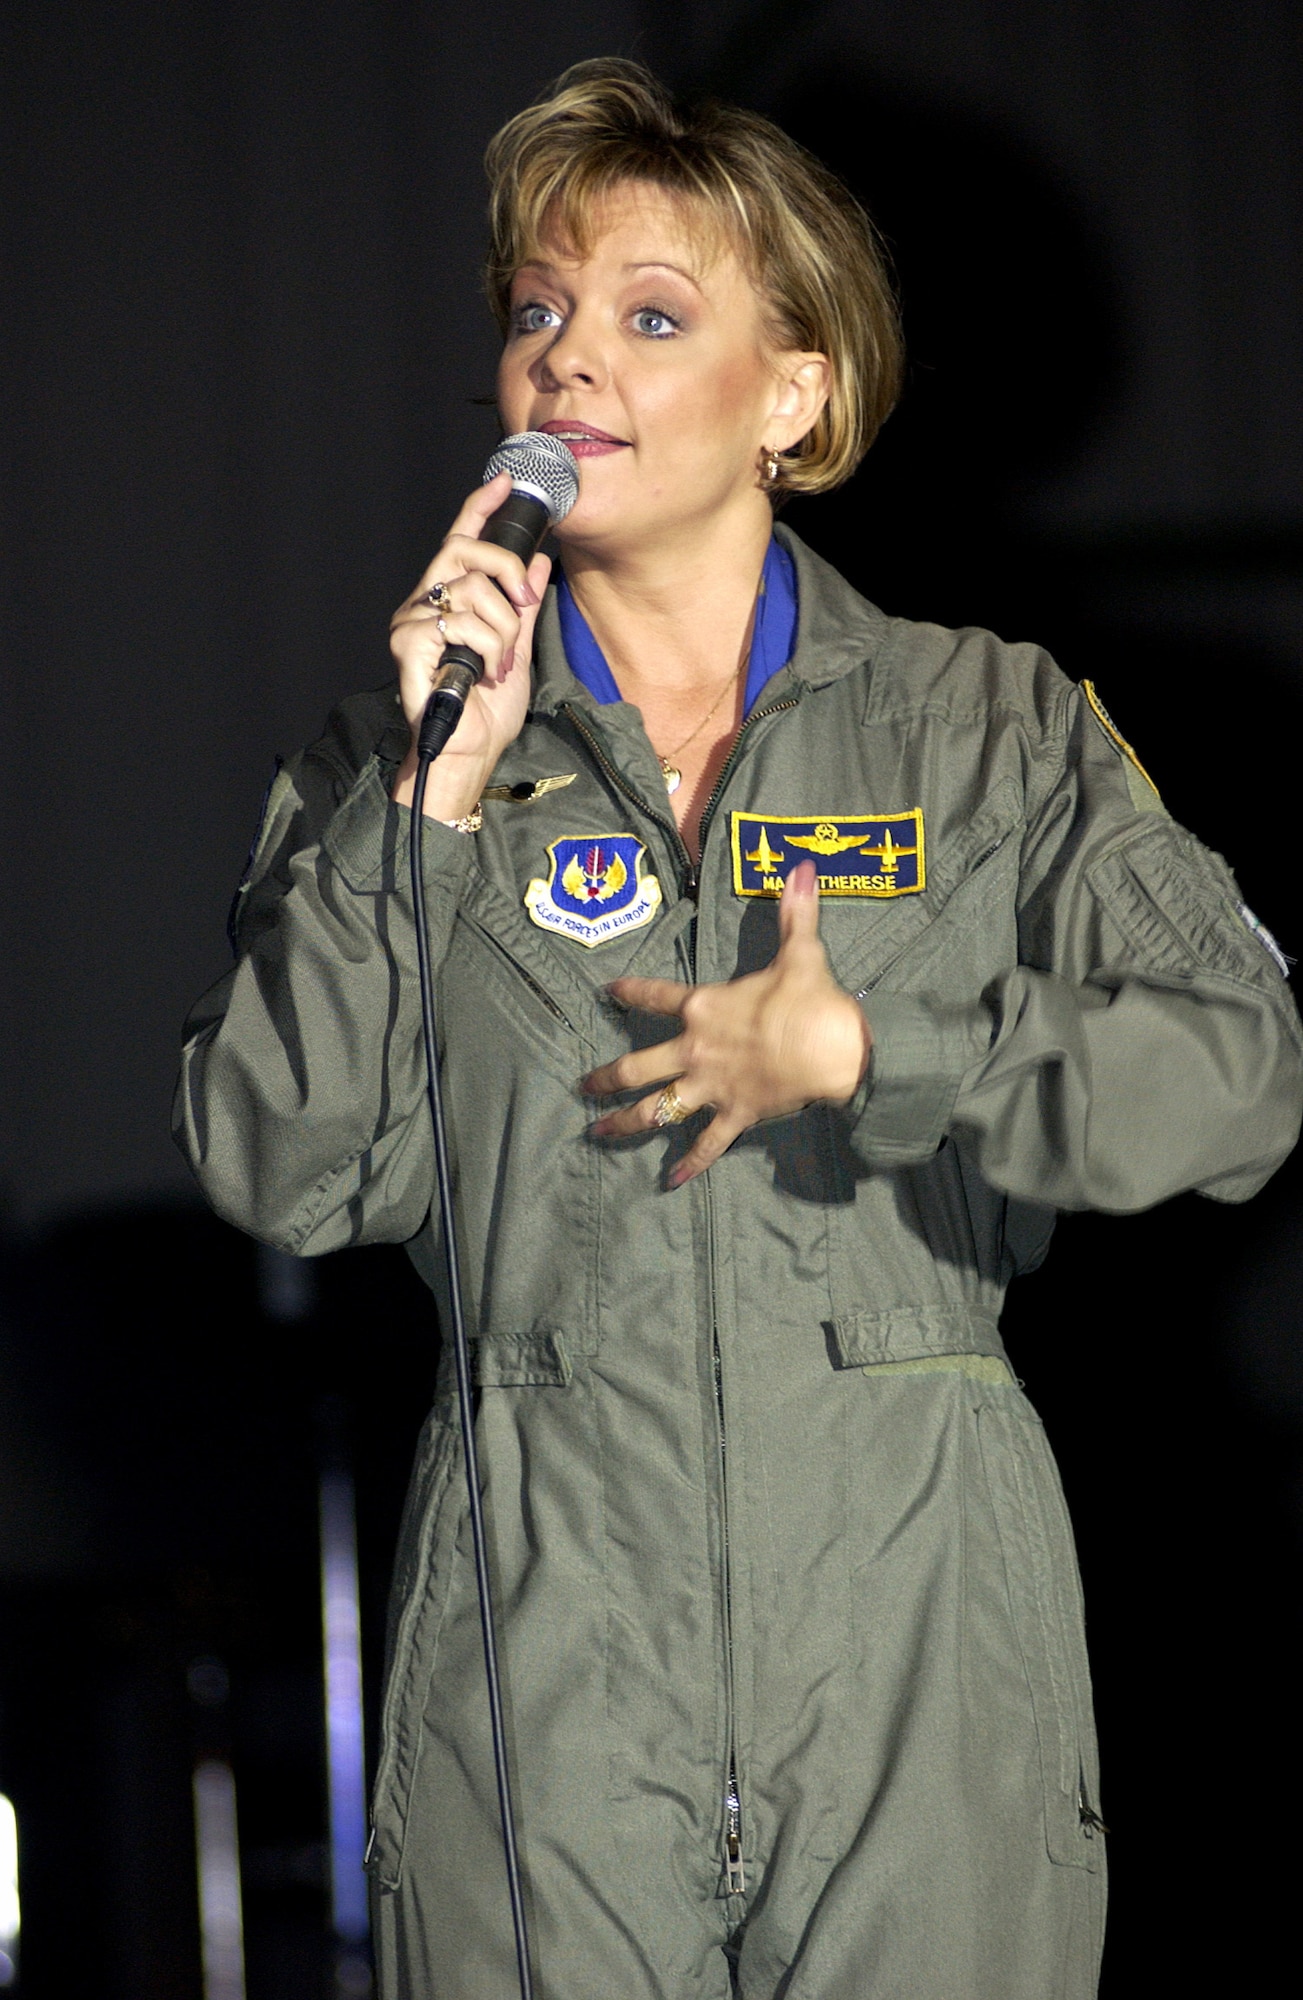 LAJES FIELD, Azores -- Mary Therese Tebbe thanks the crowd during a concert event here Nov. 18.  Tebbe, country-music group Restless Heart, Comedian Andy Andrews and the New England Patriot Cheerleaders are touring Europe with the Air Force Reserve Band as part of a United Services Organizations holiday tour called Operation Seasons Greetings.  Tebbe is an anchorwoman for a television station in Macon, Ga.  (U.S. Air Force photo by Tech. Sgt. Robert W. Valenca)